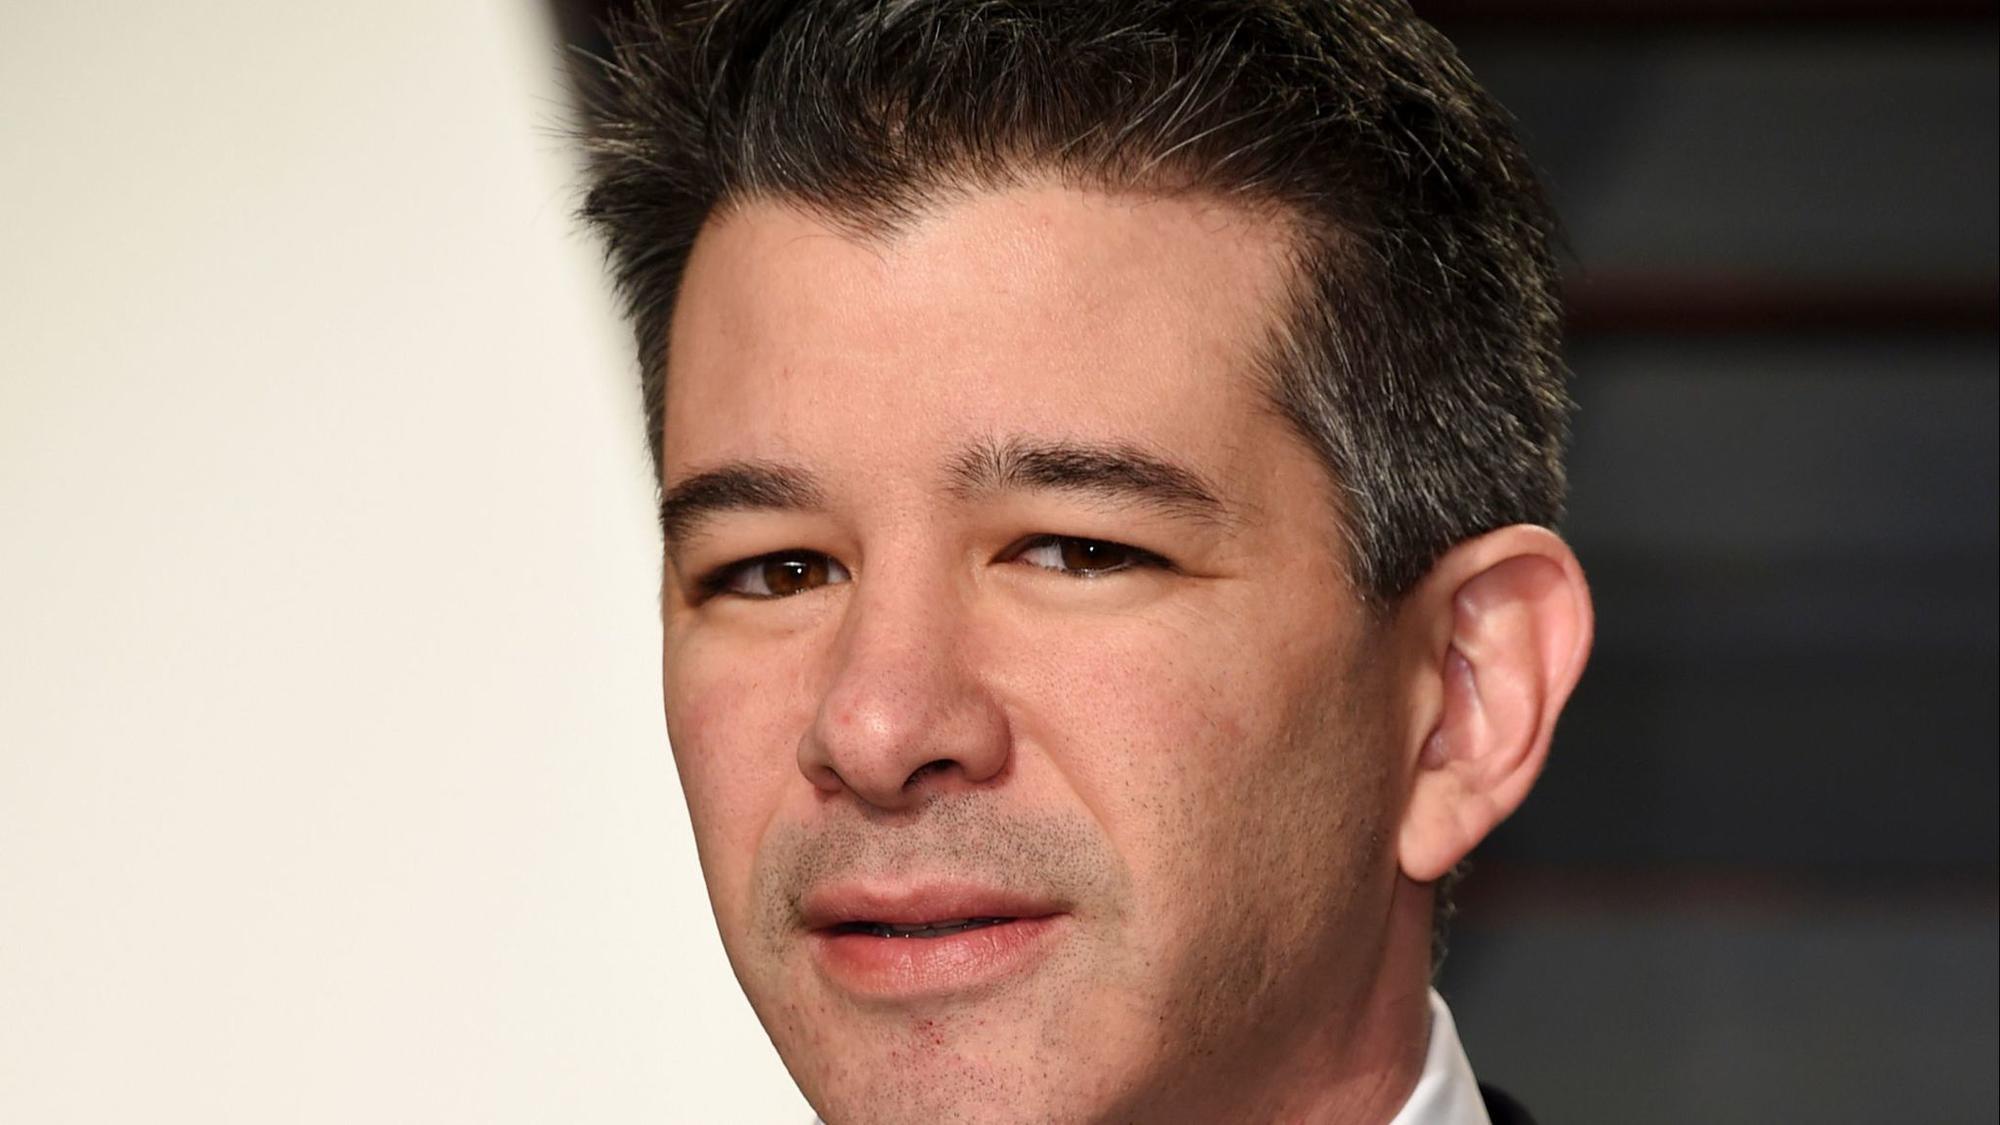 Pay day or defeat? Travis Kalanick to sell a chunk of his Uber stock